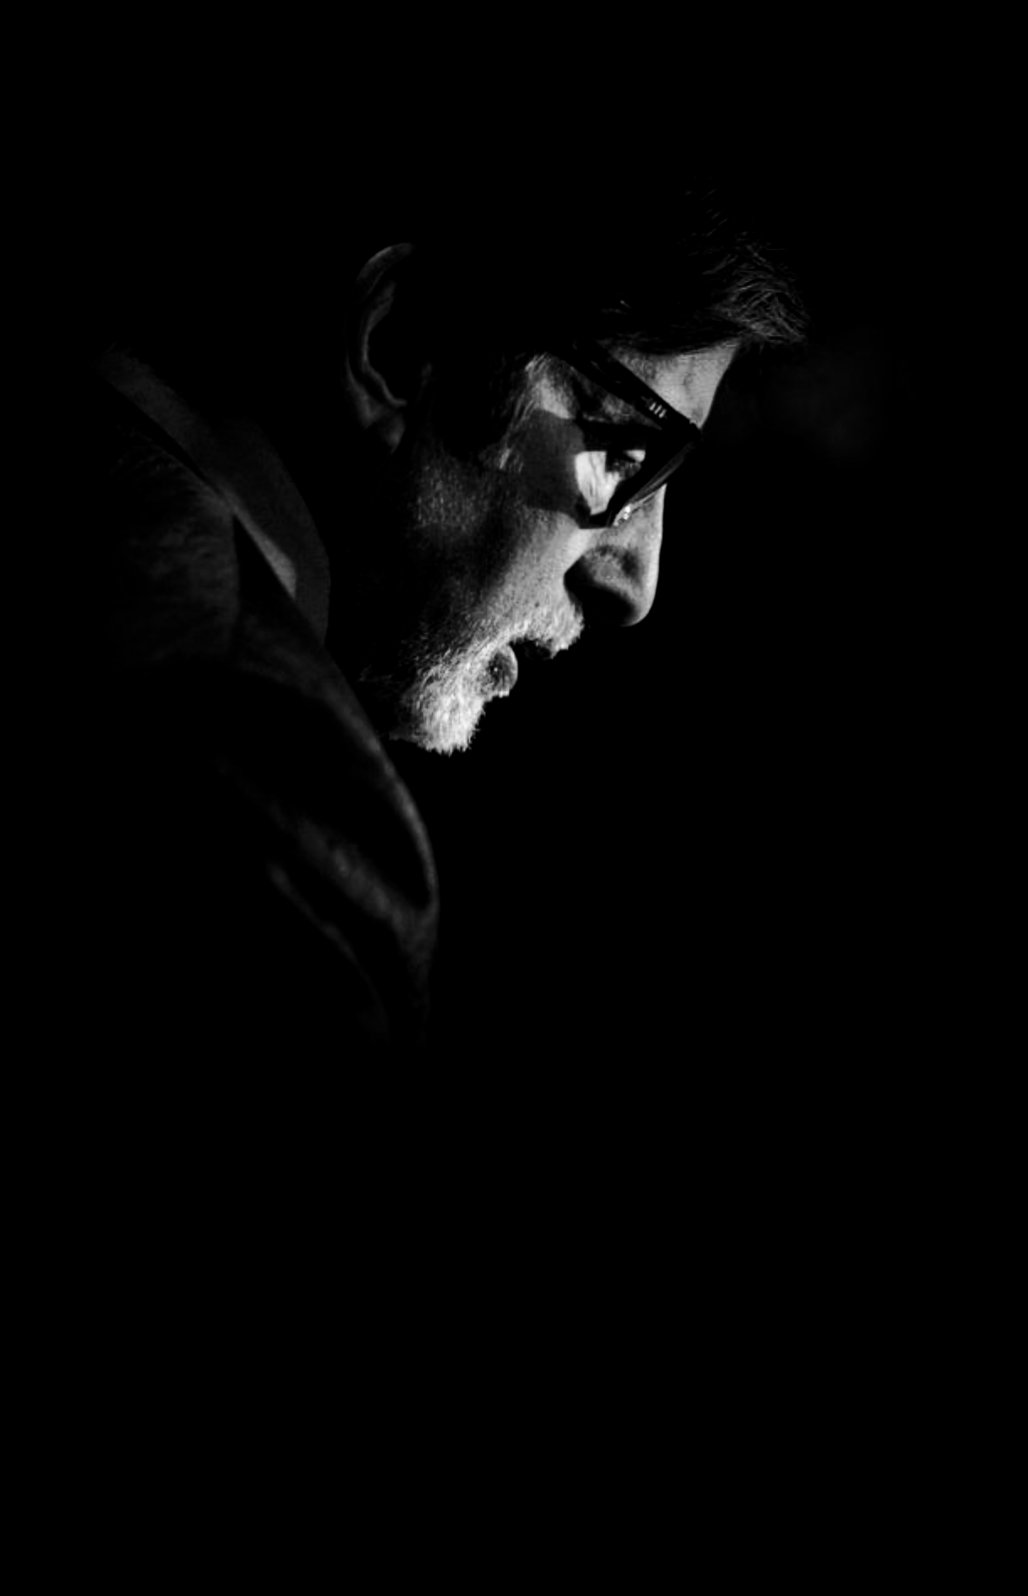  bachchan sir a very happy birthday.many many returns of the day. 